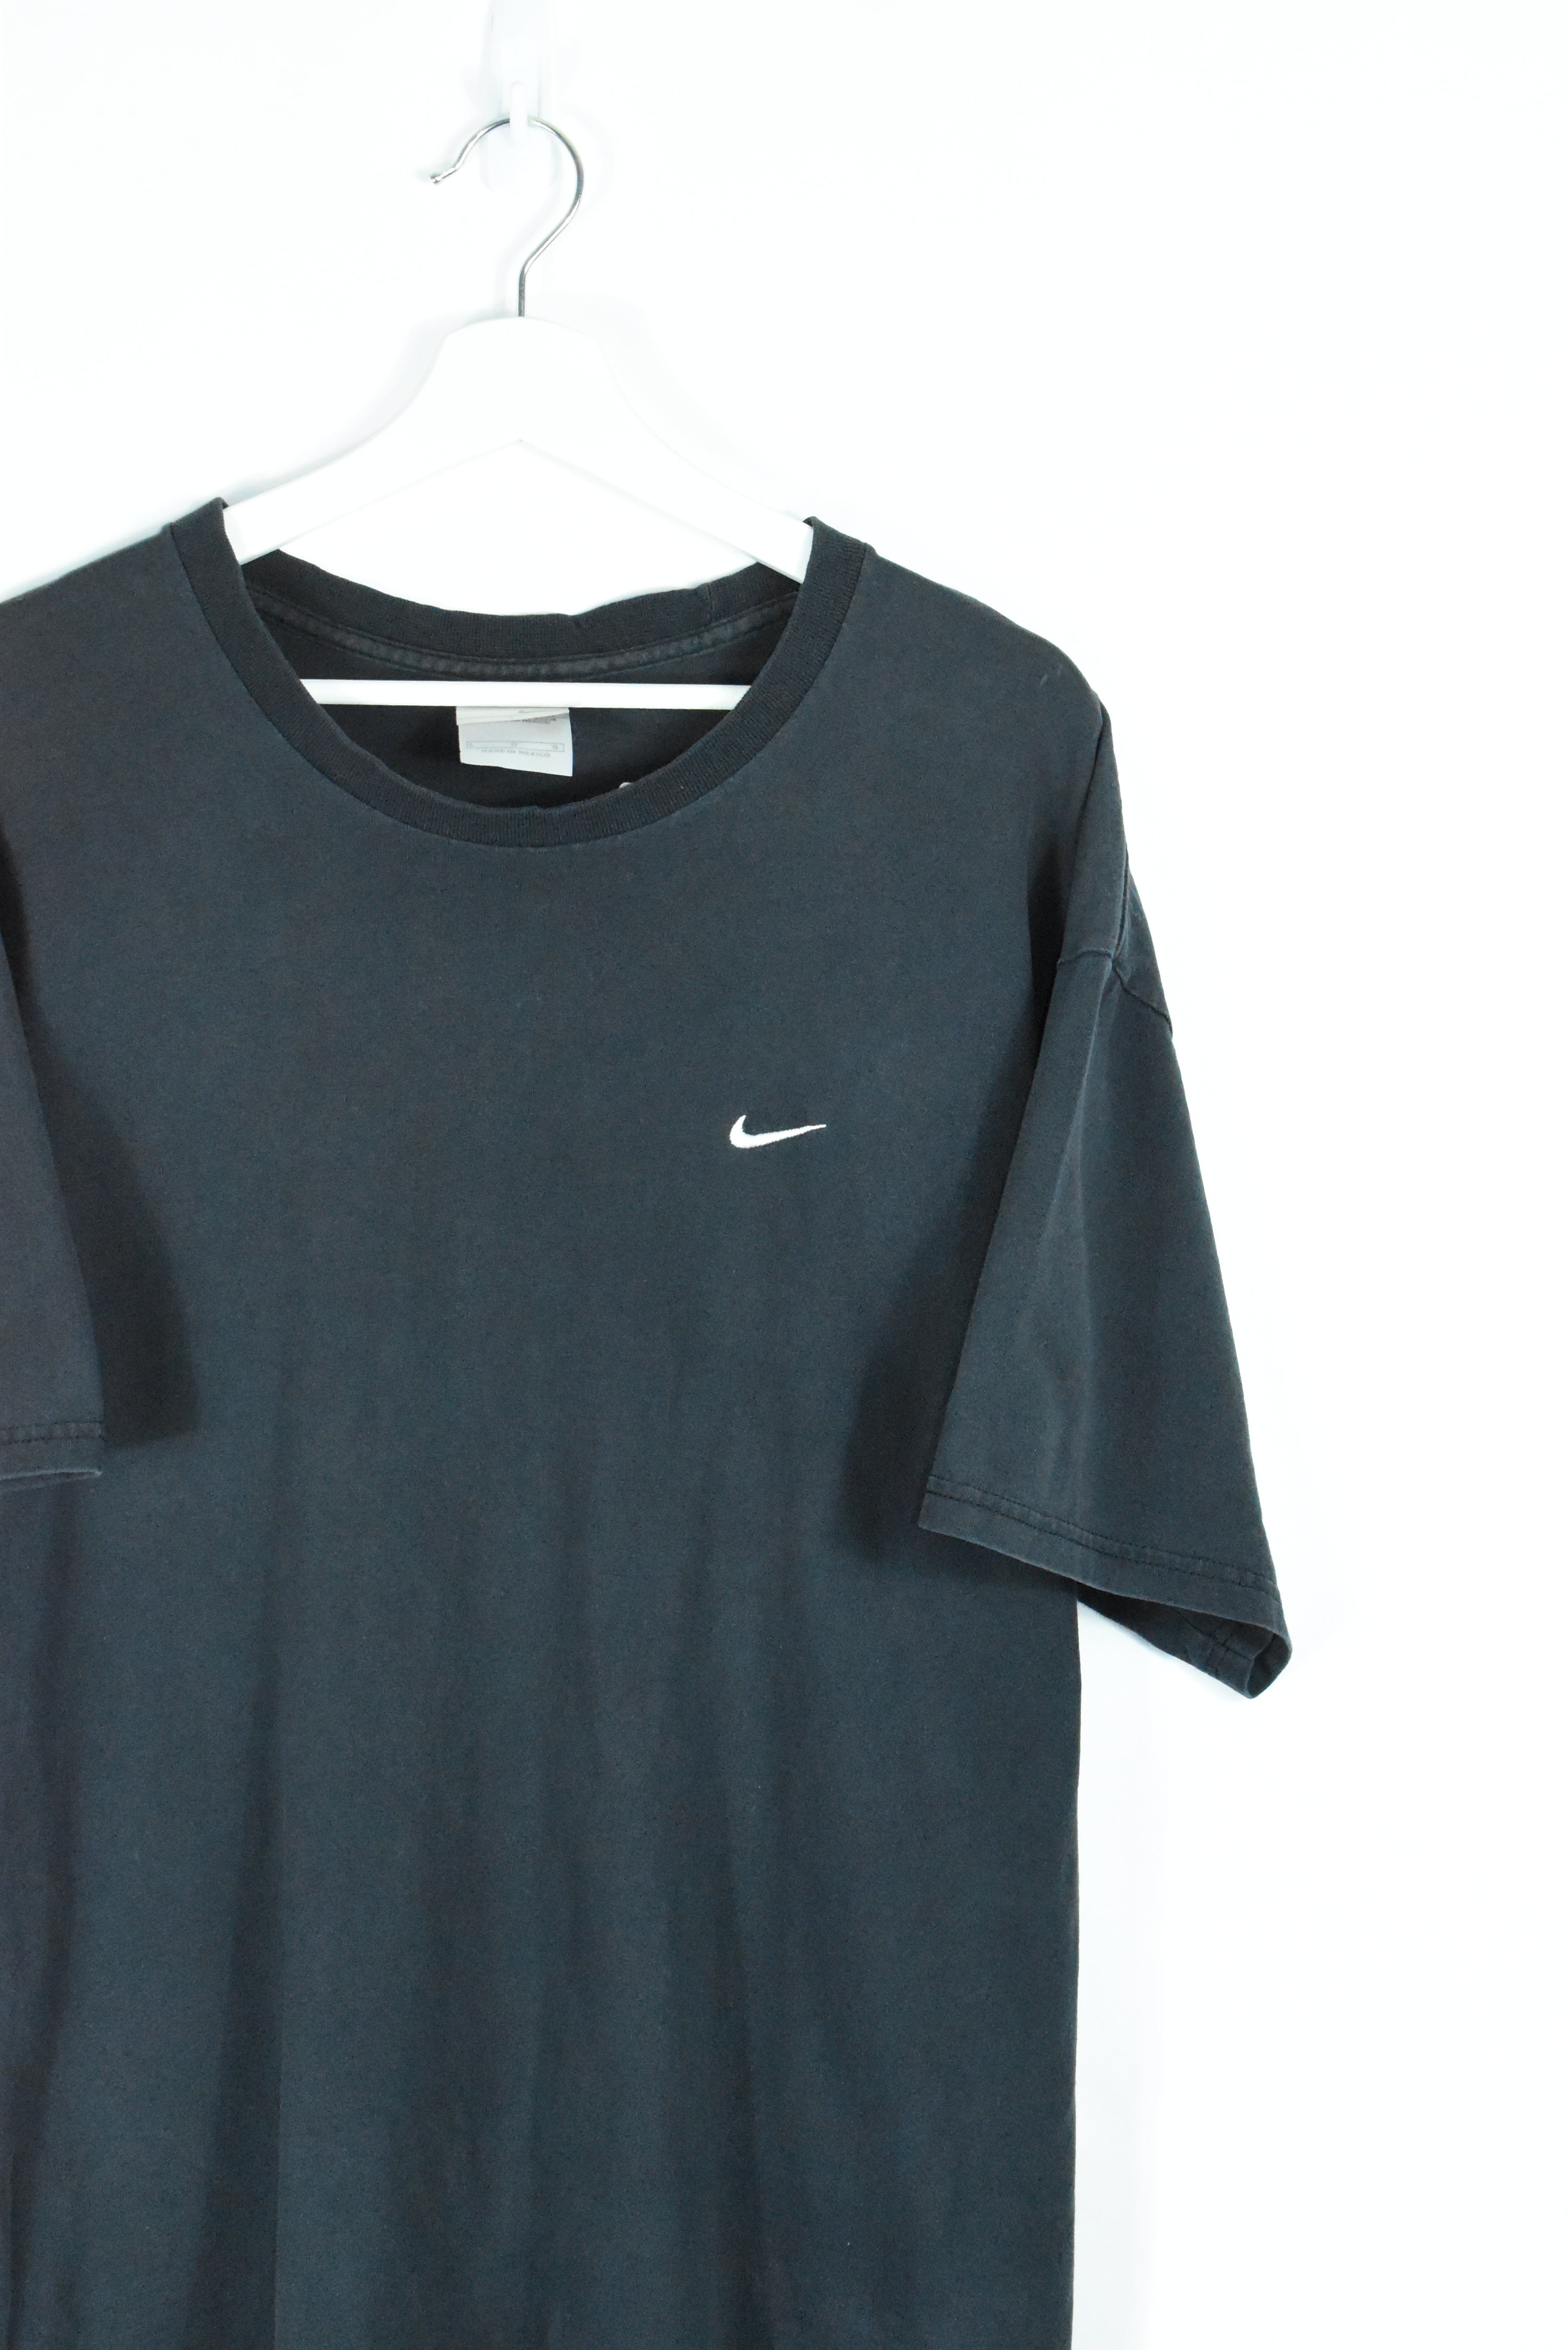 Vintage Nike Small Swoosh Embroidery T Shirt XLARGE